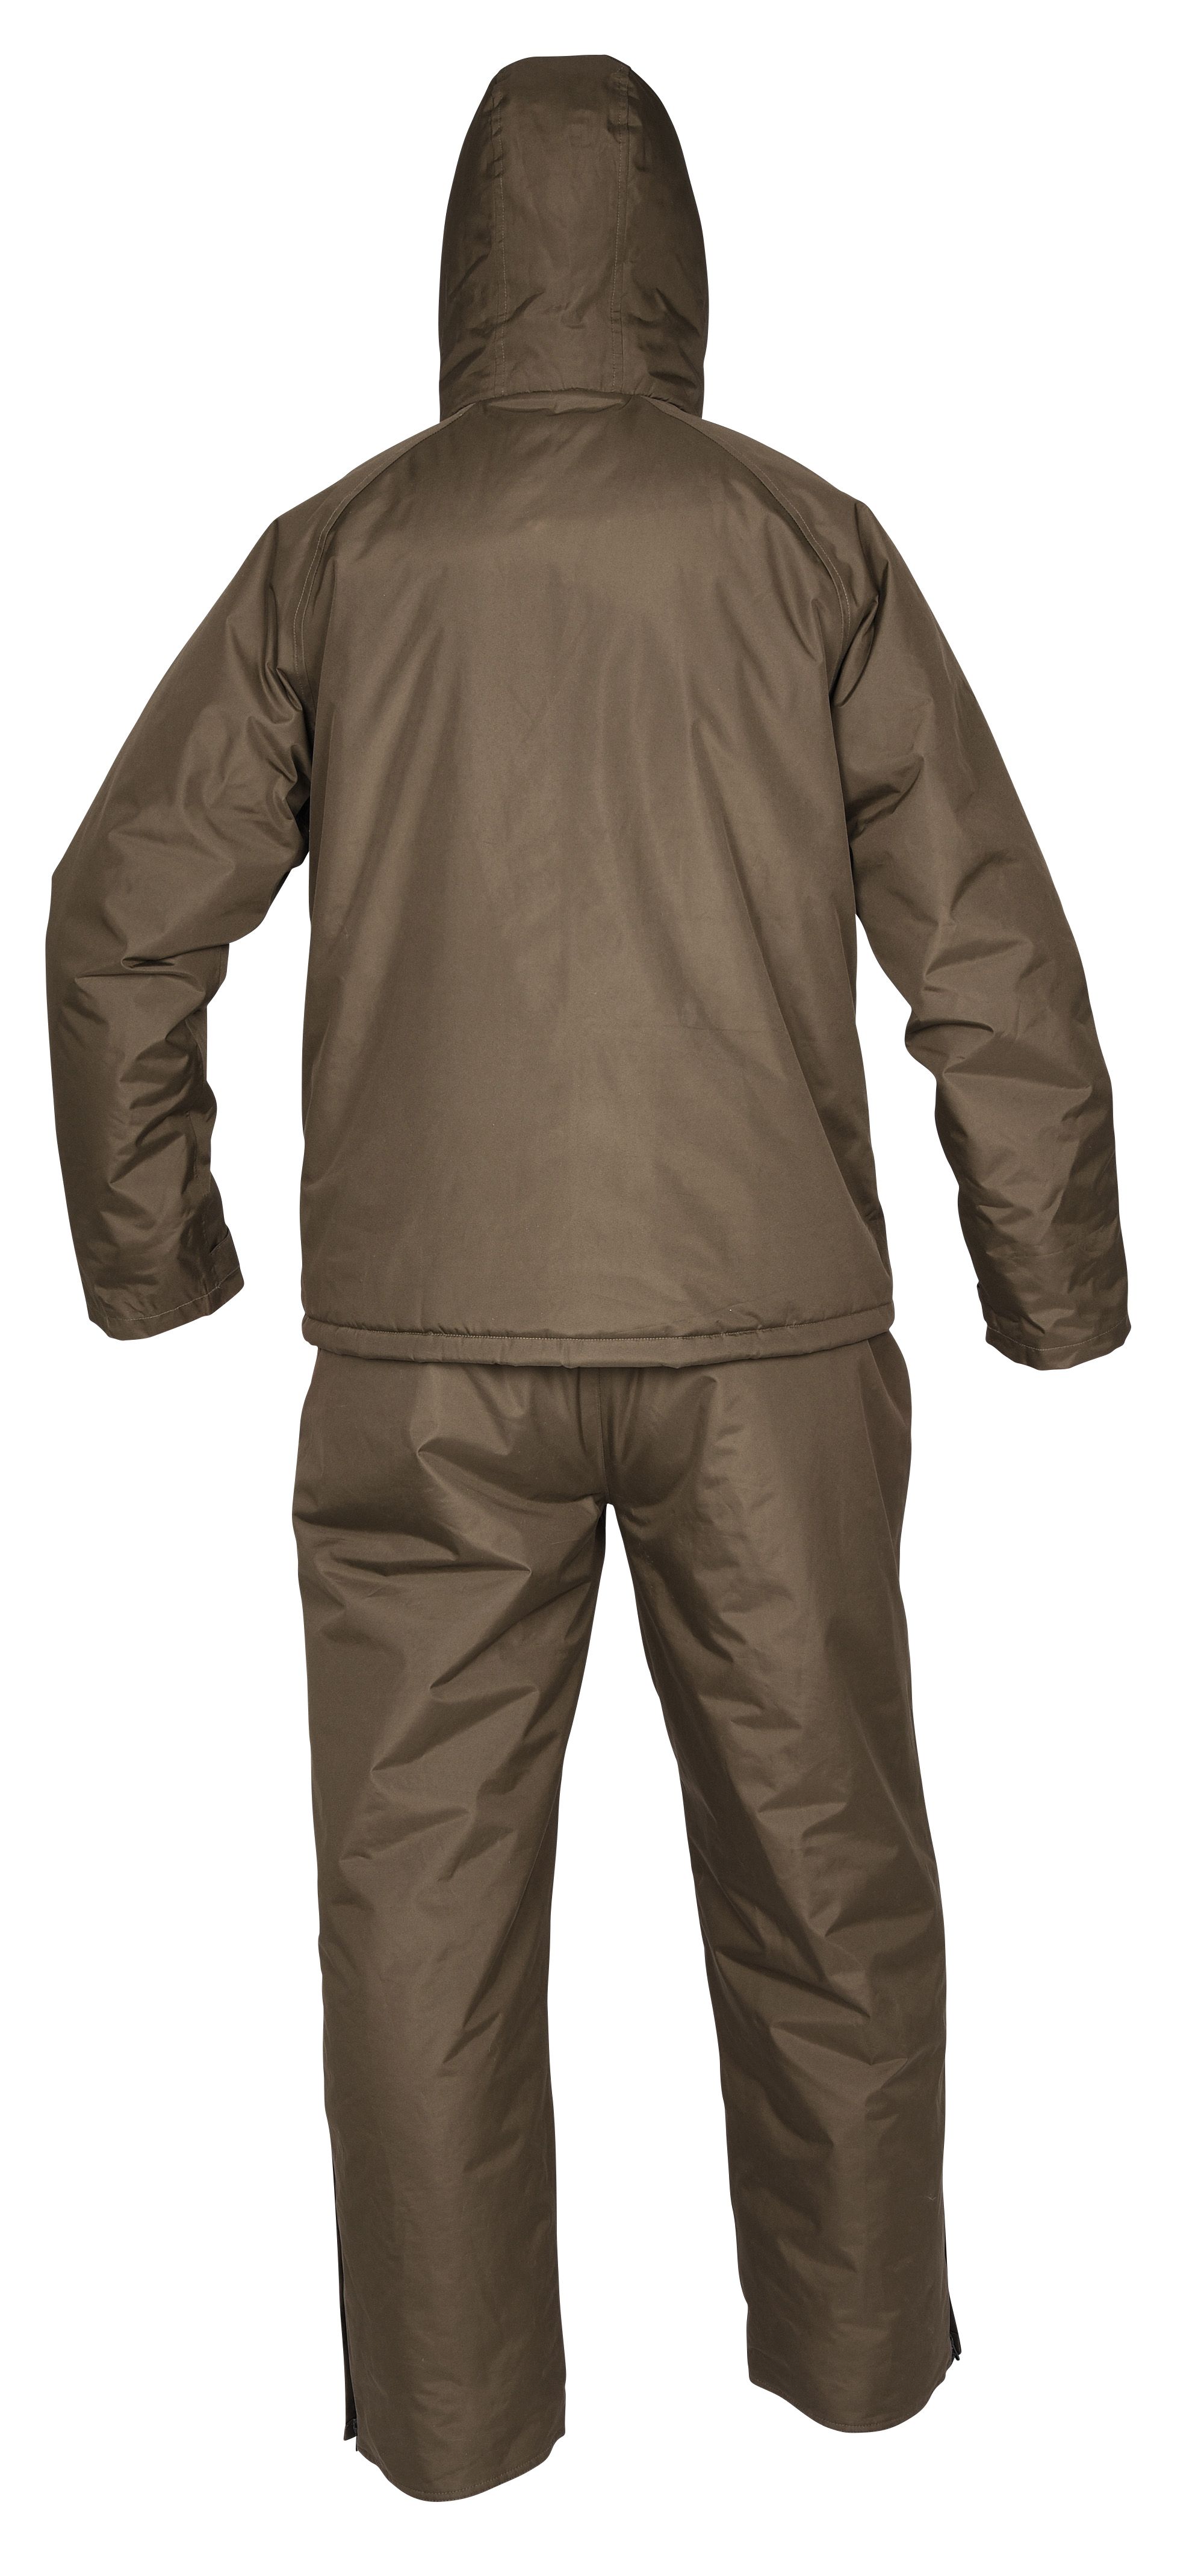 Winter Fishing Suits - Thermal and Insulated Suits for Carp